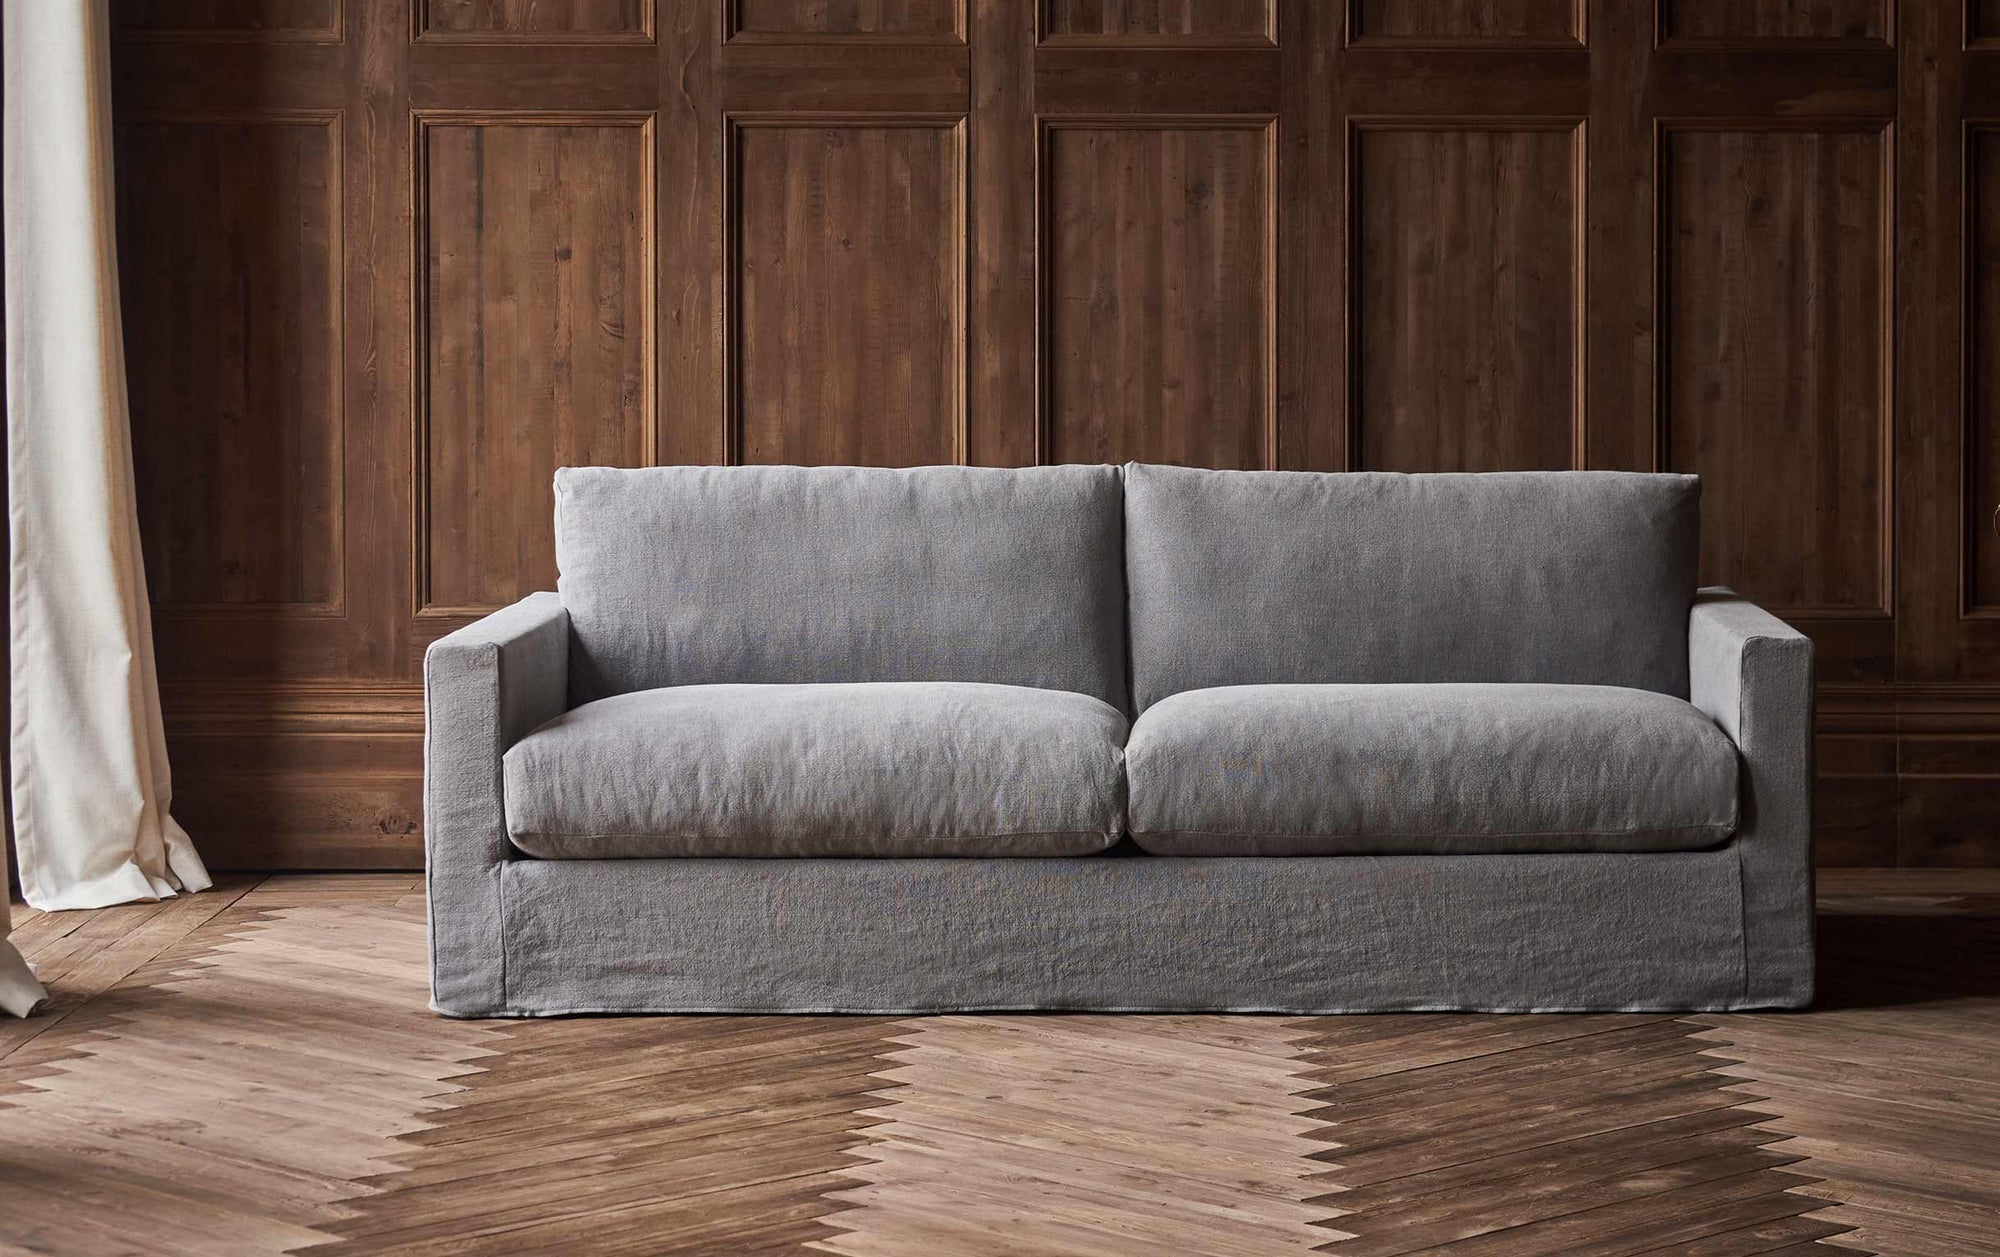 Devyn 84" Sofa in Ink Cap, a medium cool grey Light Weight Linen, placed in a naturally lit, wood-panelled room